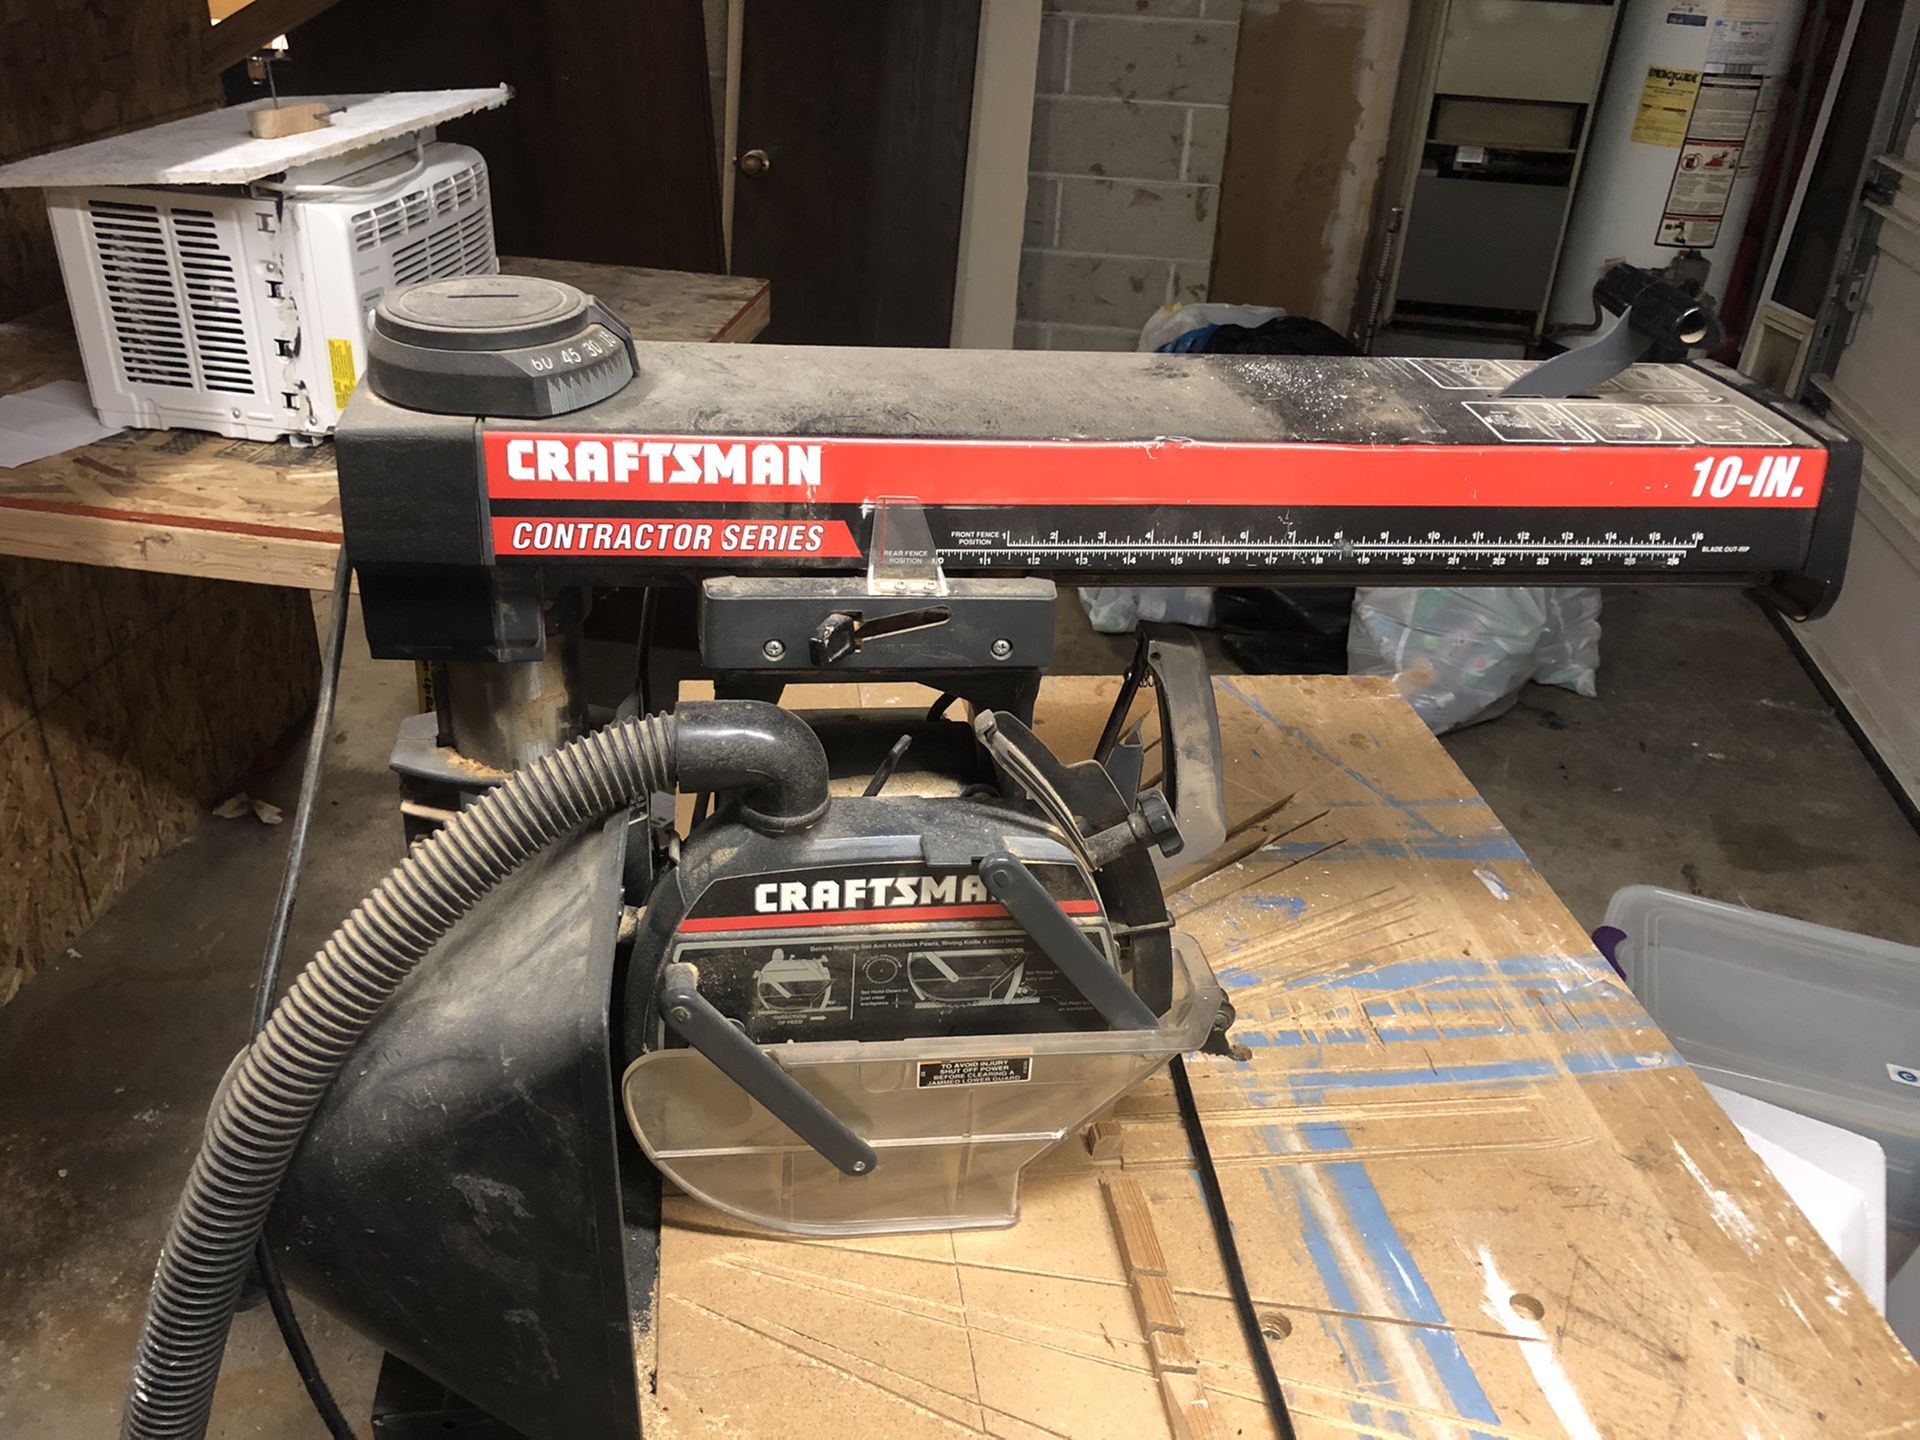 Craftsman radial arm saw contractor series